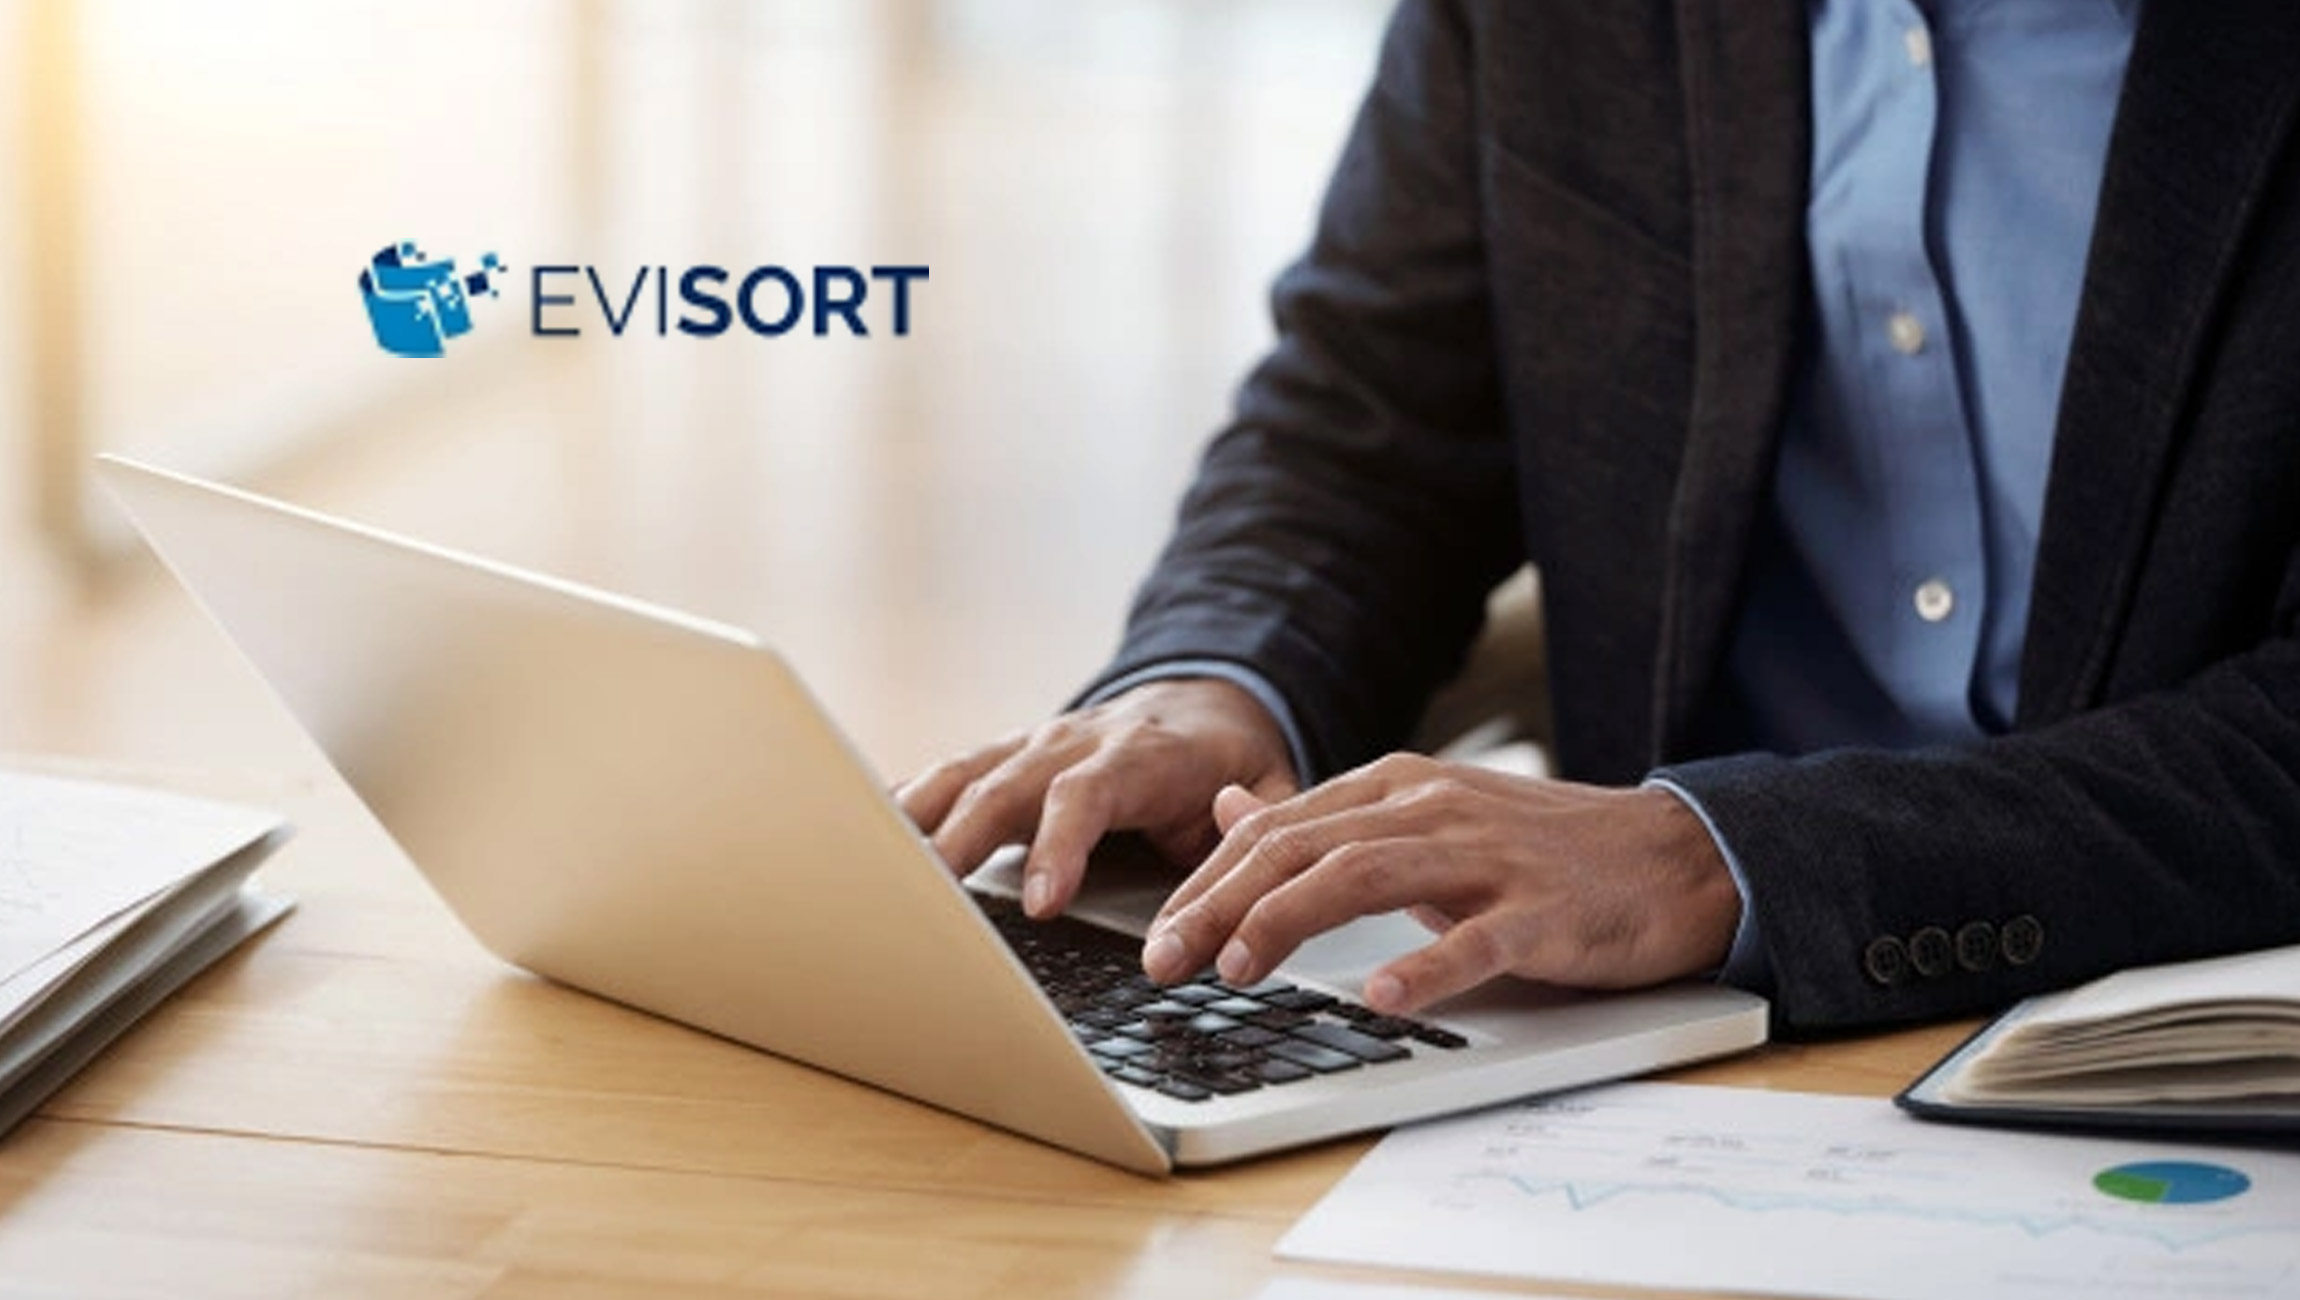 Evisort Introduces the First-ever Intelligent Dashboarding that Automatically Visualizes Data From Thousands of Contracts in Minutes